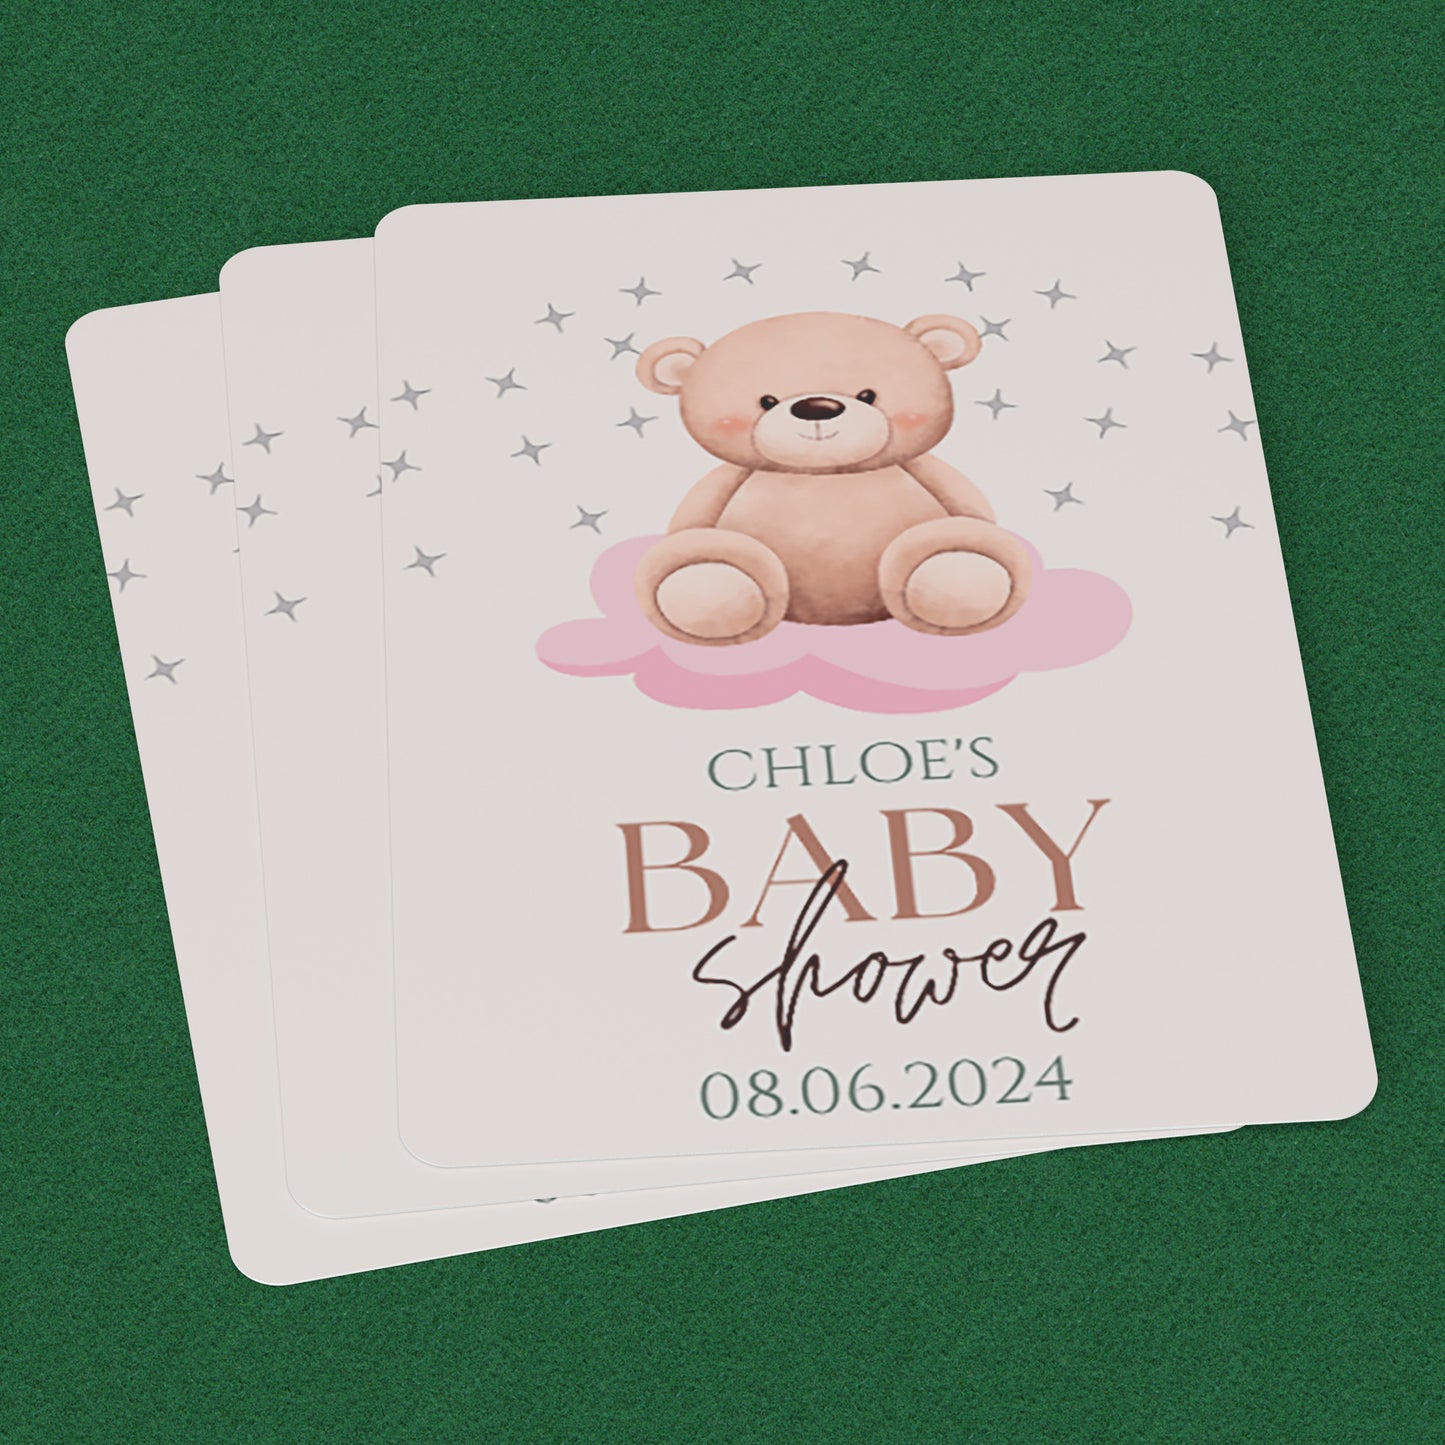 PLAYING CARDS BABY SHOWER DESIGN #1